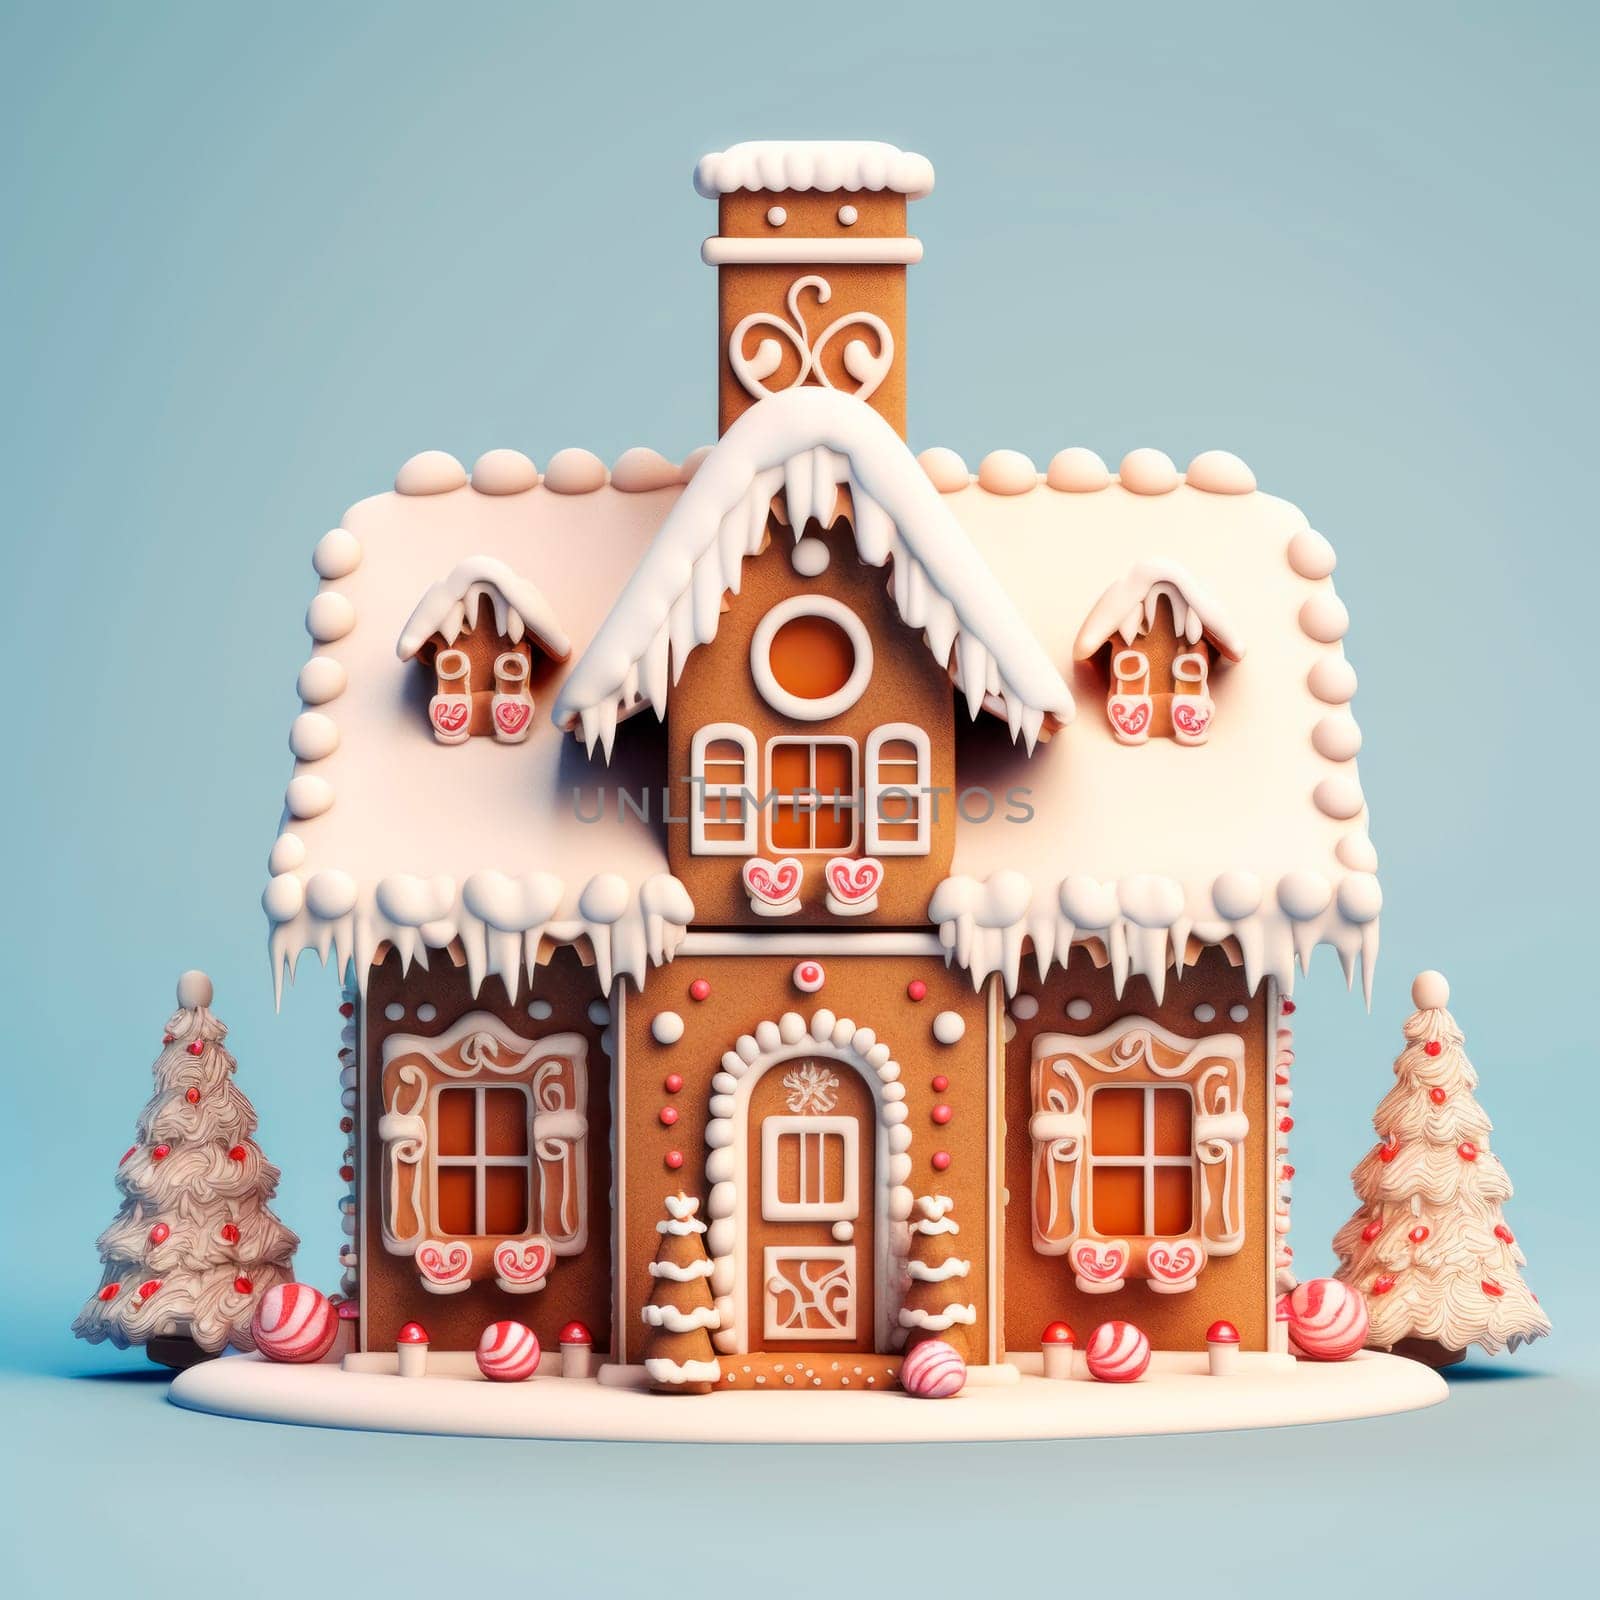 A beautiful gingerbread house on a delicate light background.